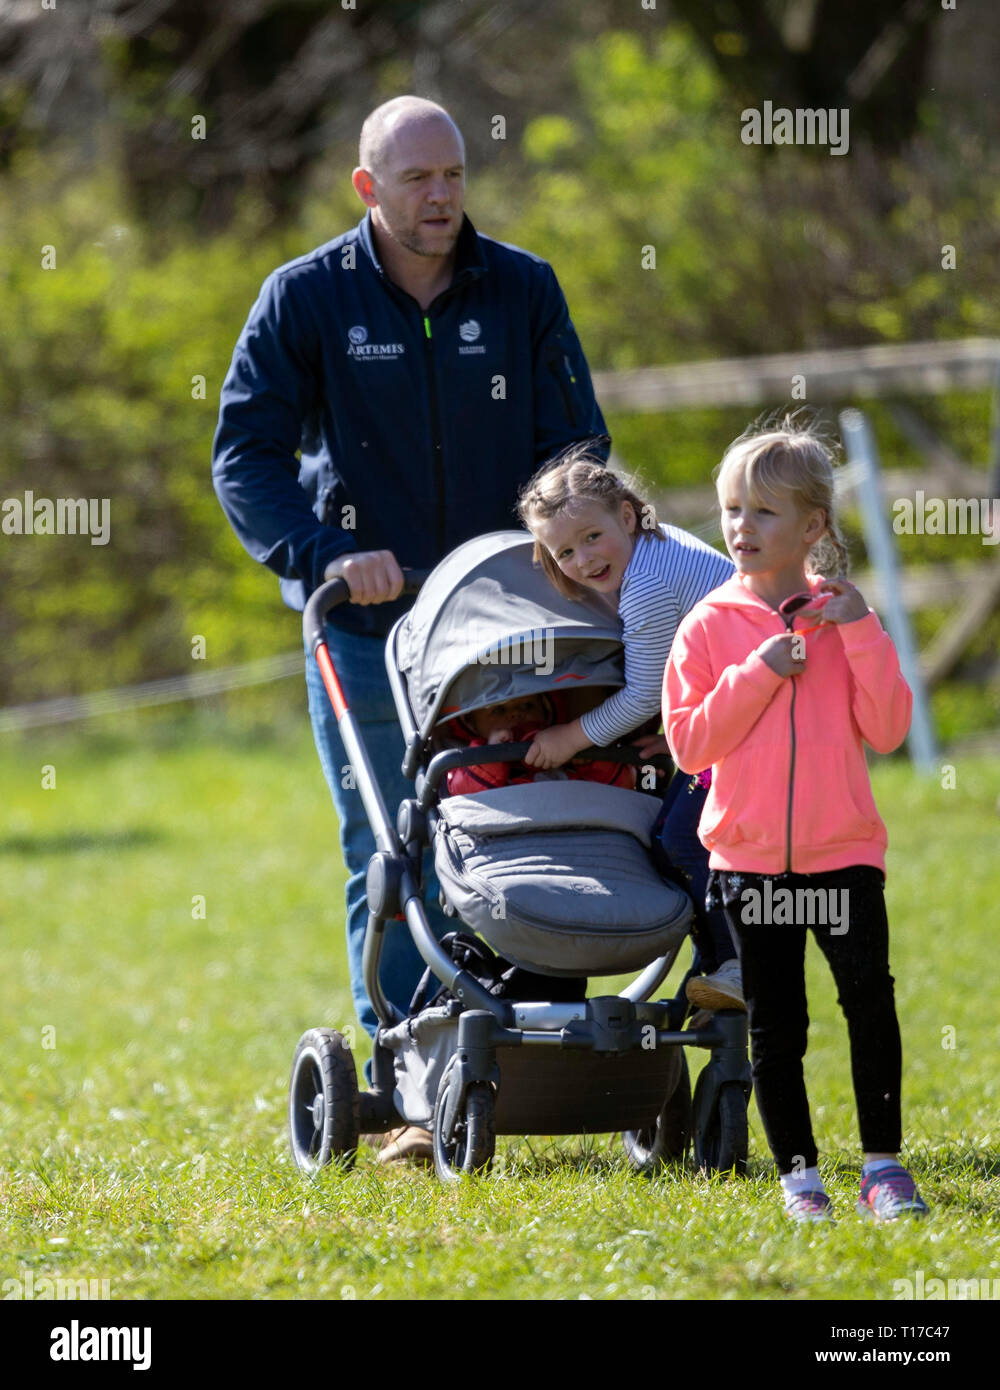 Mike Tindall with his daughters Mia (centre) and Lena Elizabeth (in buggy)  and with Isla Phillips (right) at the Land Rover Gatcombe Horse Trials, on  Gatcombe Park, Gloucestershire Stock Photo - Alamy